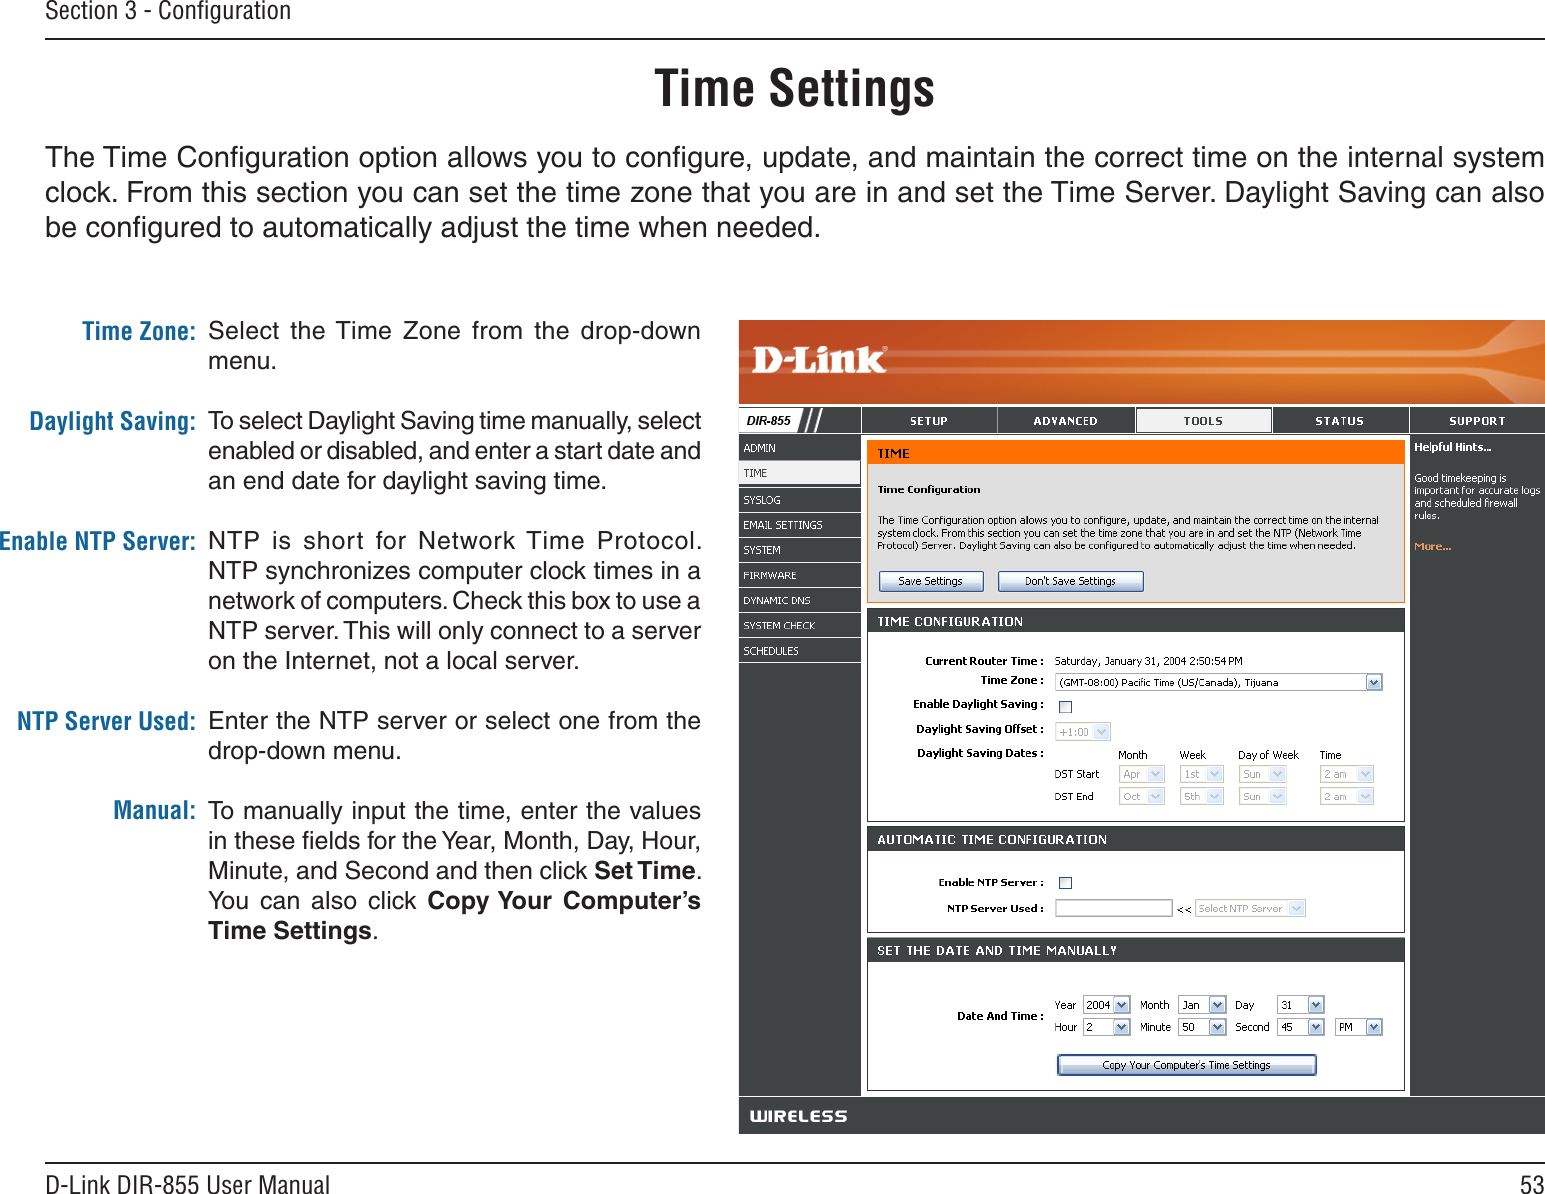 53D-Link DIR-855 User ManualSection 3 - ConﬁgurationTime SettingsSelect  the Time  Zone  from  the  drop-down menu.To select Daylight Saving time manually, select enabled or disabled, and enter a start date and an end date for daylight saving time.NTP  is  short  for  Network Time  Protocol. NTP synchronizes computer clock times in a network of computers. Check this box to use a NTP server. This will only connect to a server on the Internet, not a local server.Enter the NTP server or select one from the drop-down menu.To manually input the time, enter the values in these ﬁelds for the Year, Month, Day, Hour, Minute, and Second and then click Set Time. You  can  also  click  Copy Your  Computer’s Time Settings.Time Zone:Daylight Saving:Enable NTP Server:NTP Server Used:Manual:The Time Conﬁguration option allows you to conﬁgure, update, and maintain the correct time on the internal system clock. From this section you can set the time zone that you are in and set the Time Server. Daylight Saving can also be conﬁgured to automatically adjust the time when needed.